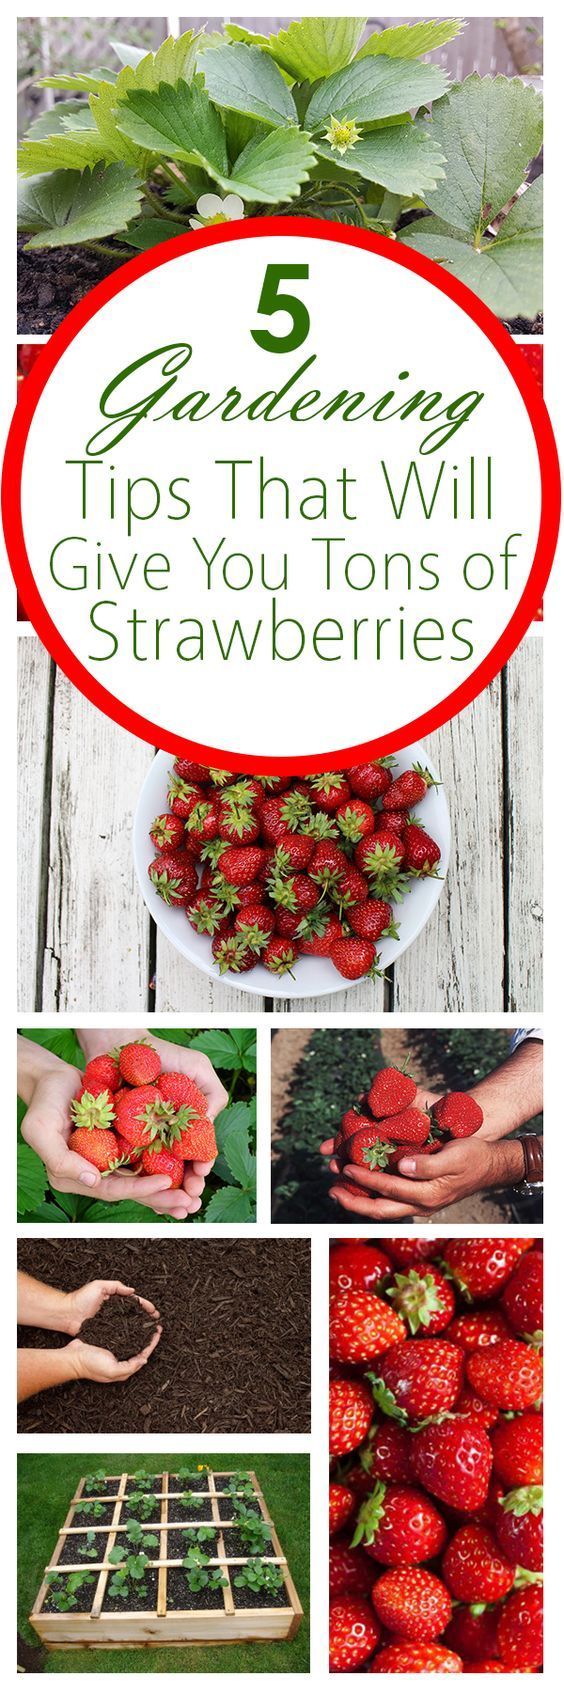 5 Gardening Tips That Will Give You Tons of Strawberries